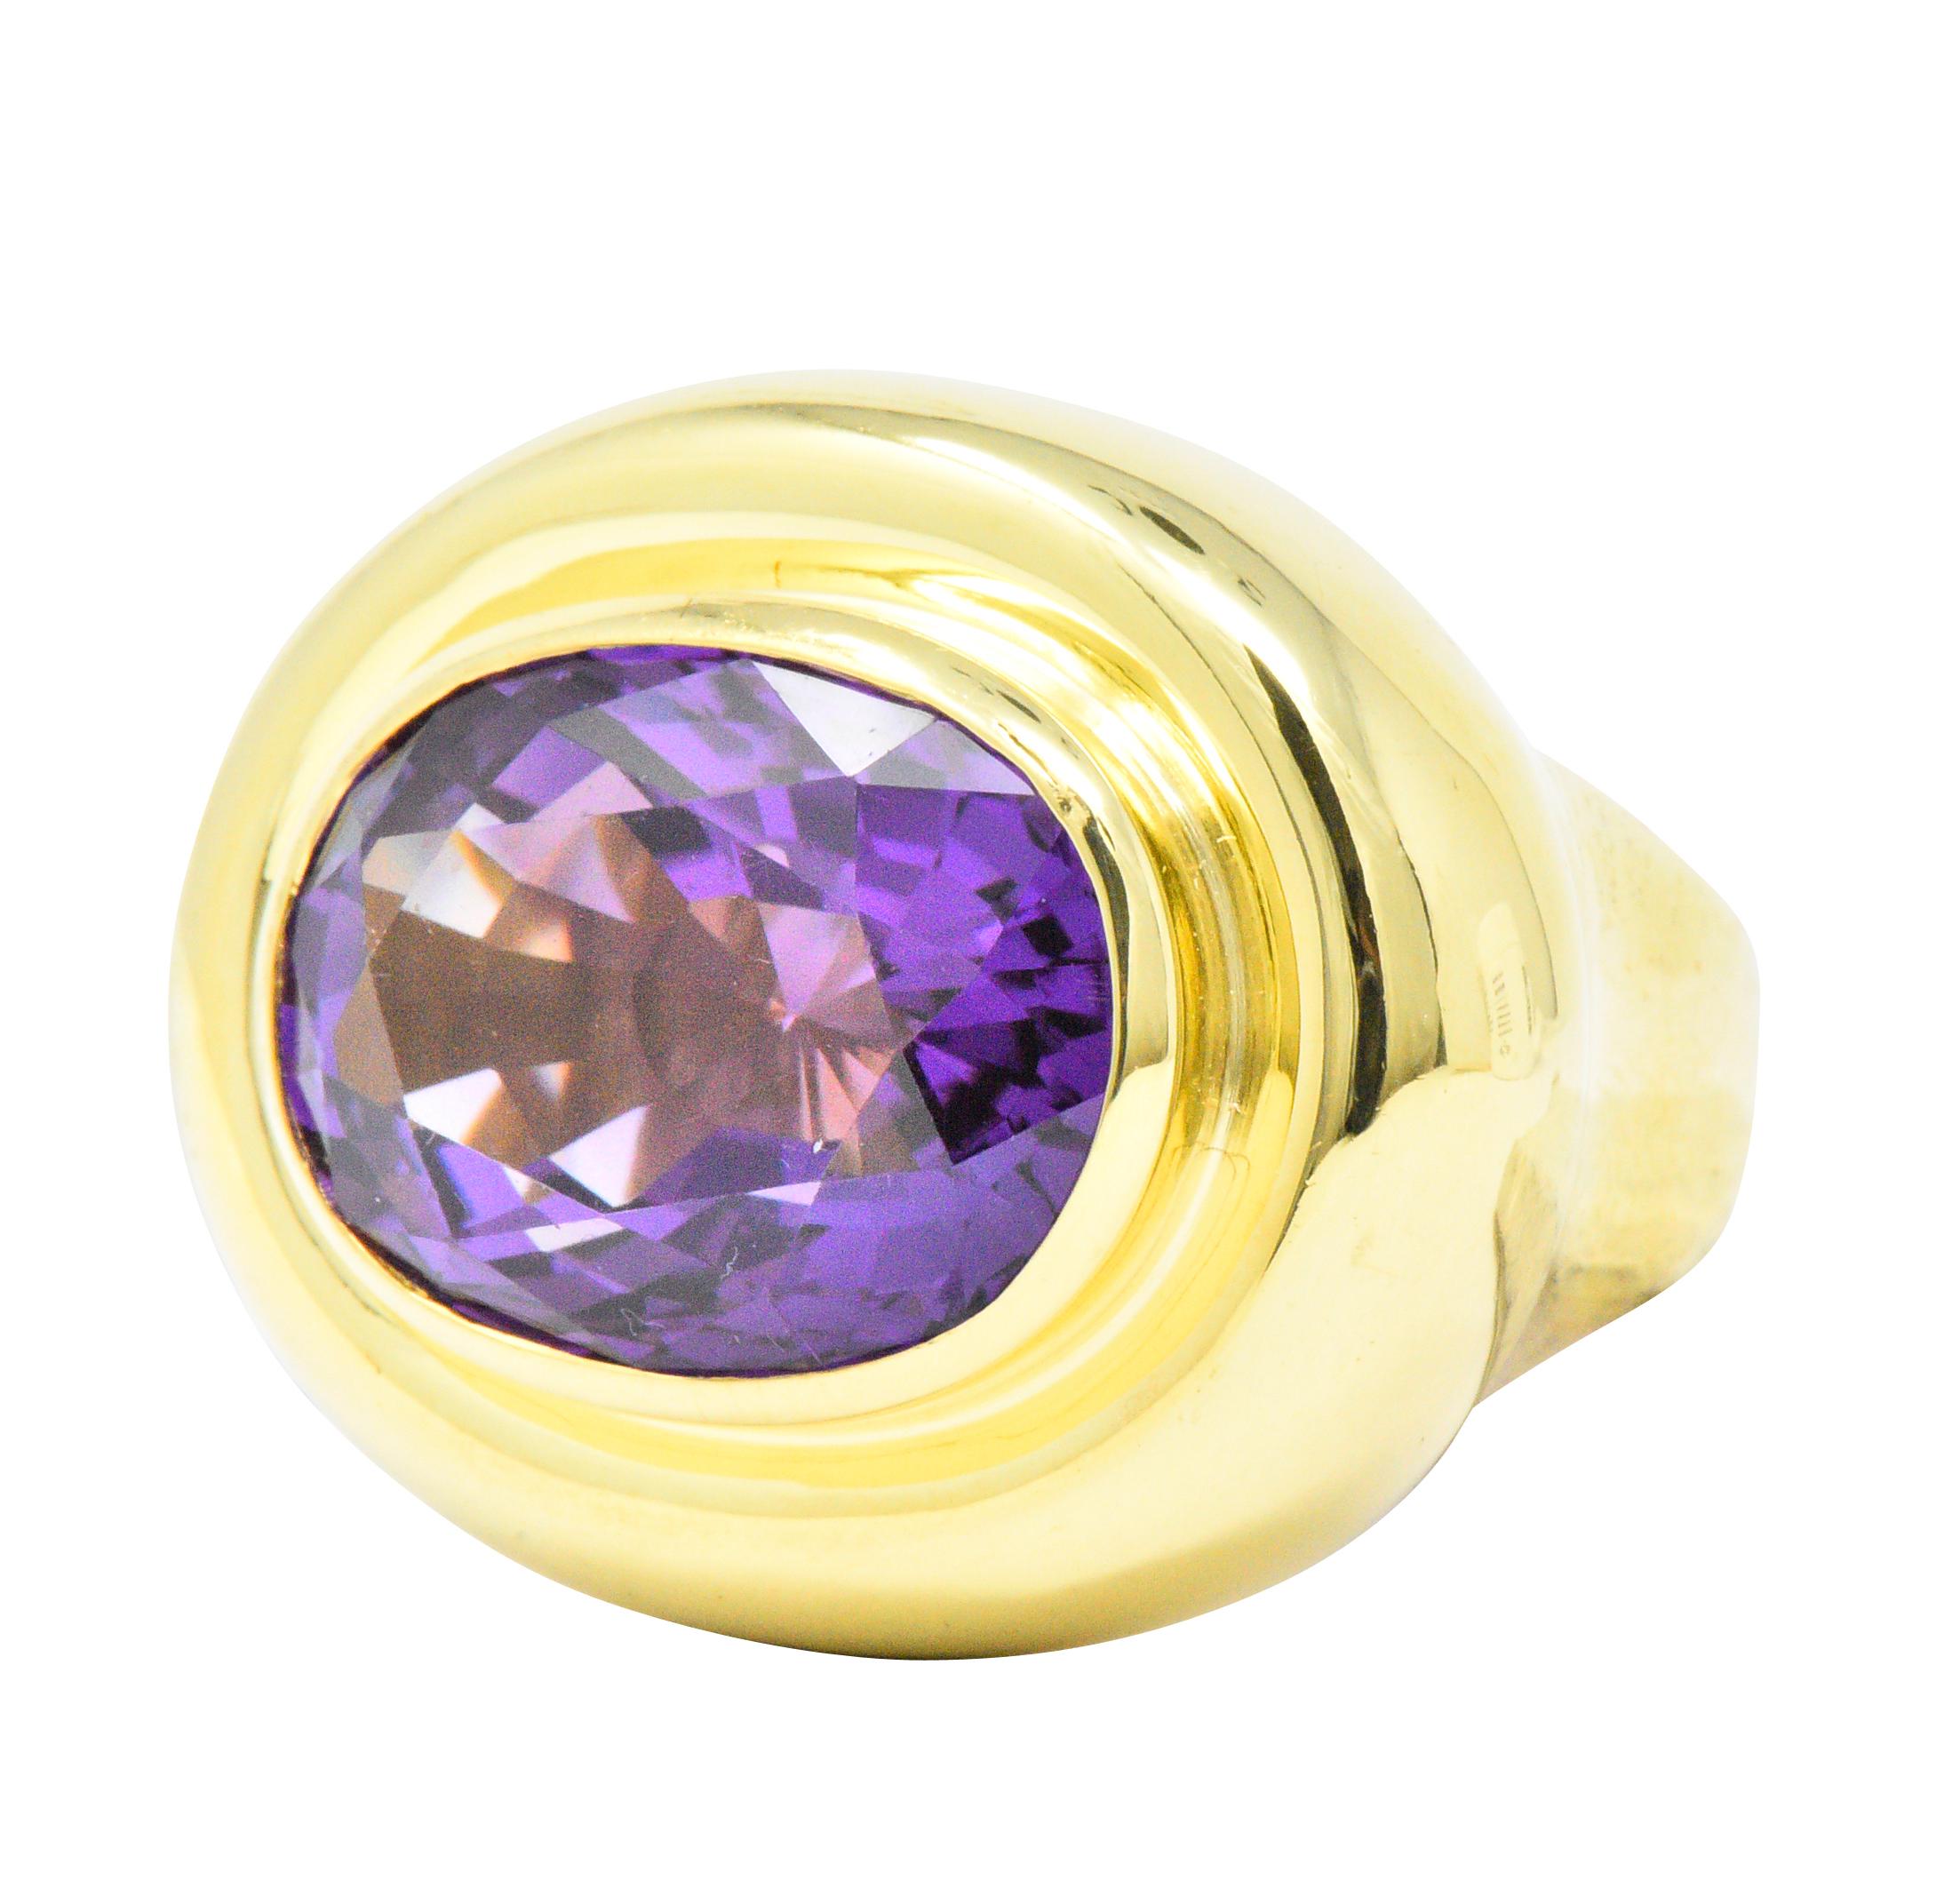 Centering an oval cut amethyst weighing approximately 20.00 carats total, bright vivid purple

Bezel set in a high polished rounded tiered mount

With inner sizing ring to accommodate smaller finger sizes

Ring Size: 6 1/2 & Not Sizable

Top